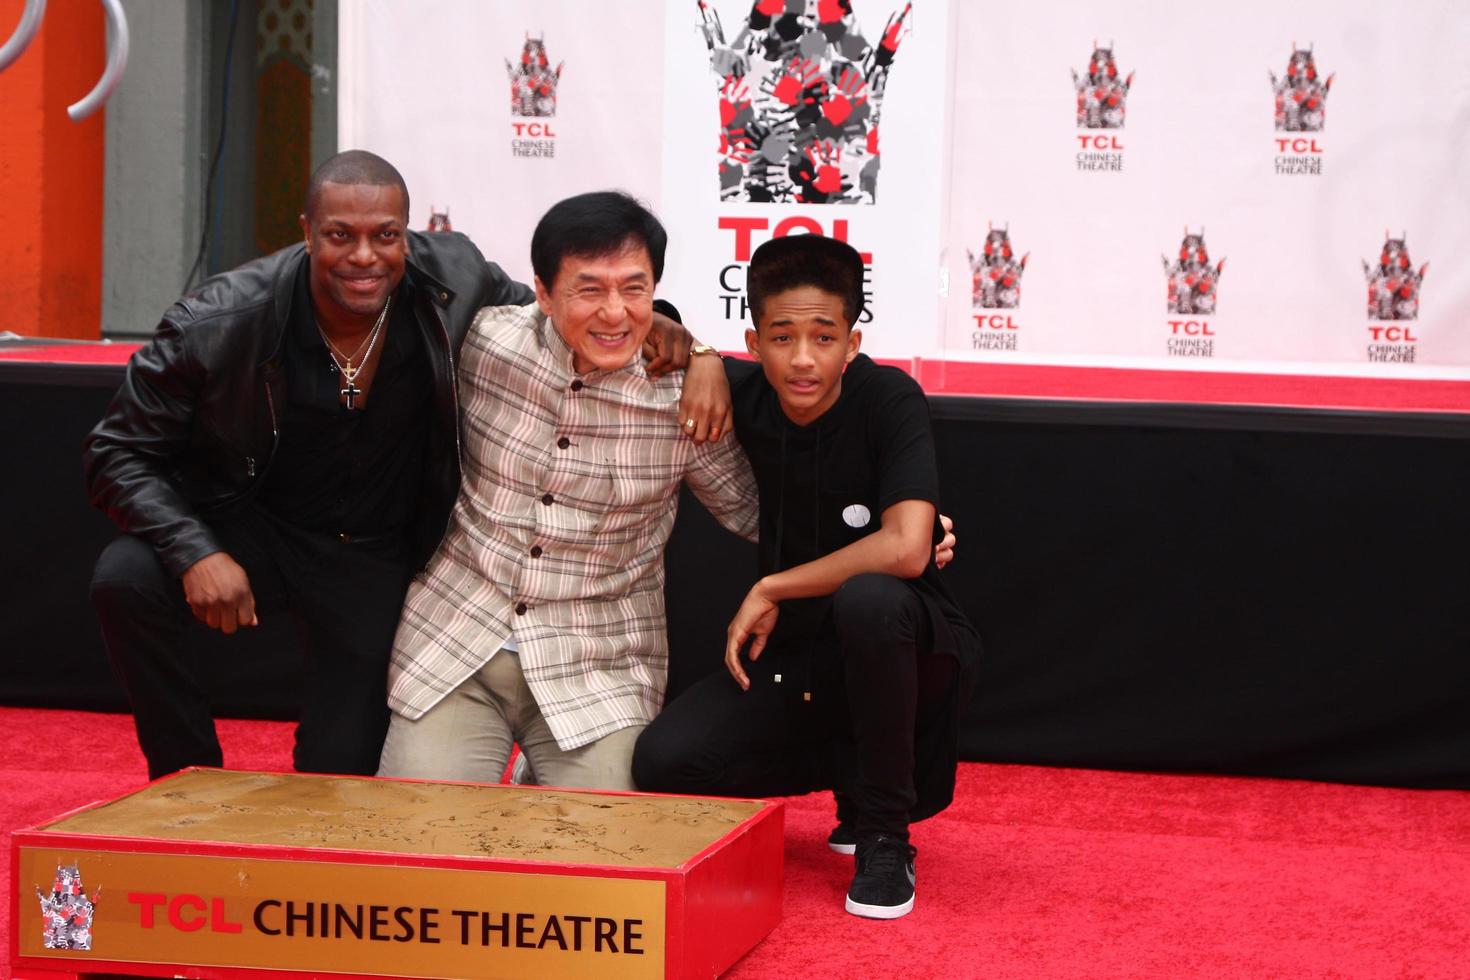 LOS ANGELES, JUN 6 - Chris Tucker, Jackie Chan, Jaden Smith at the Hand and Footprint ceremony for Jackie Chan at the TCL Chinese Theater on June 6, 2013 in Los Angeles, CA photo